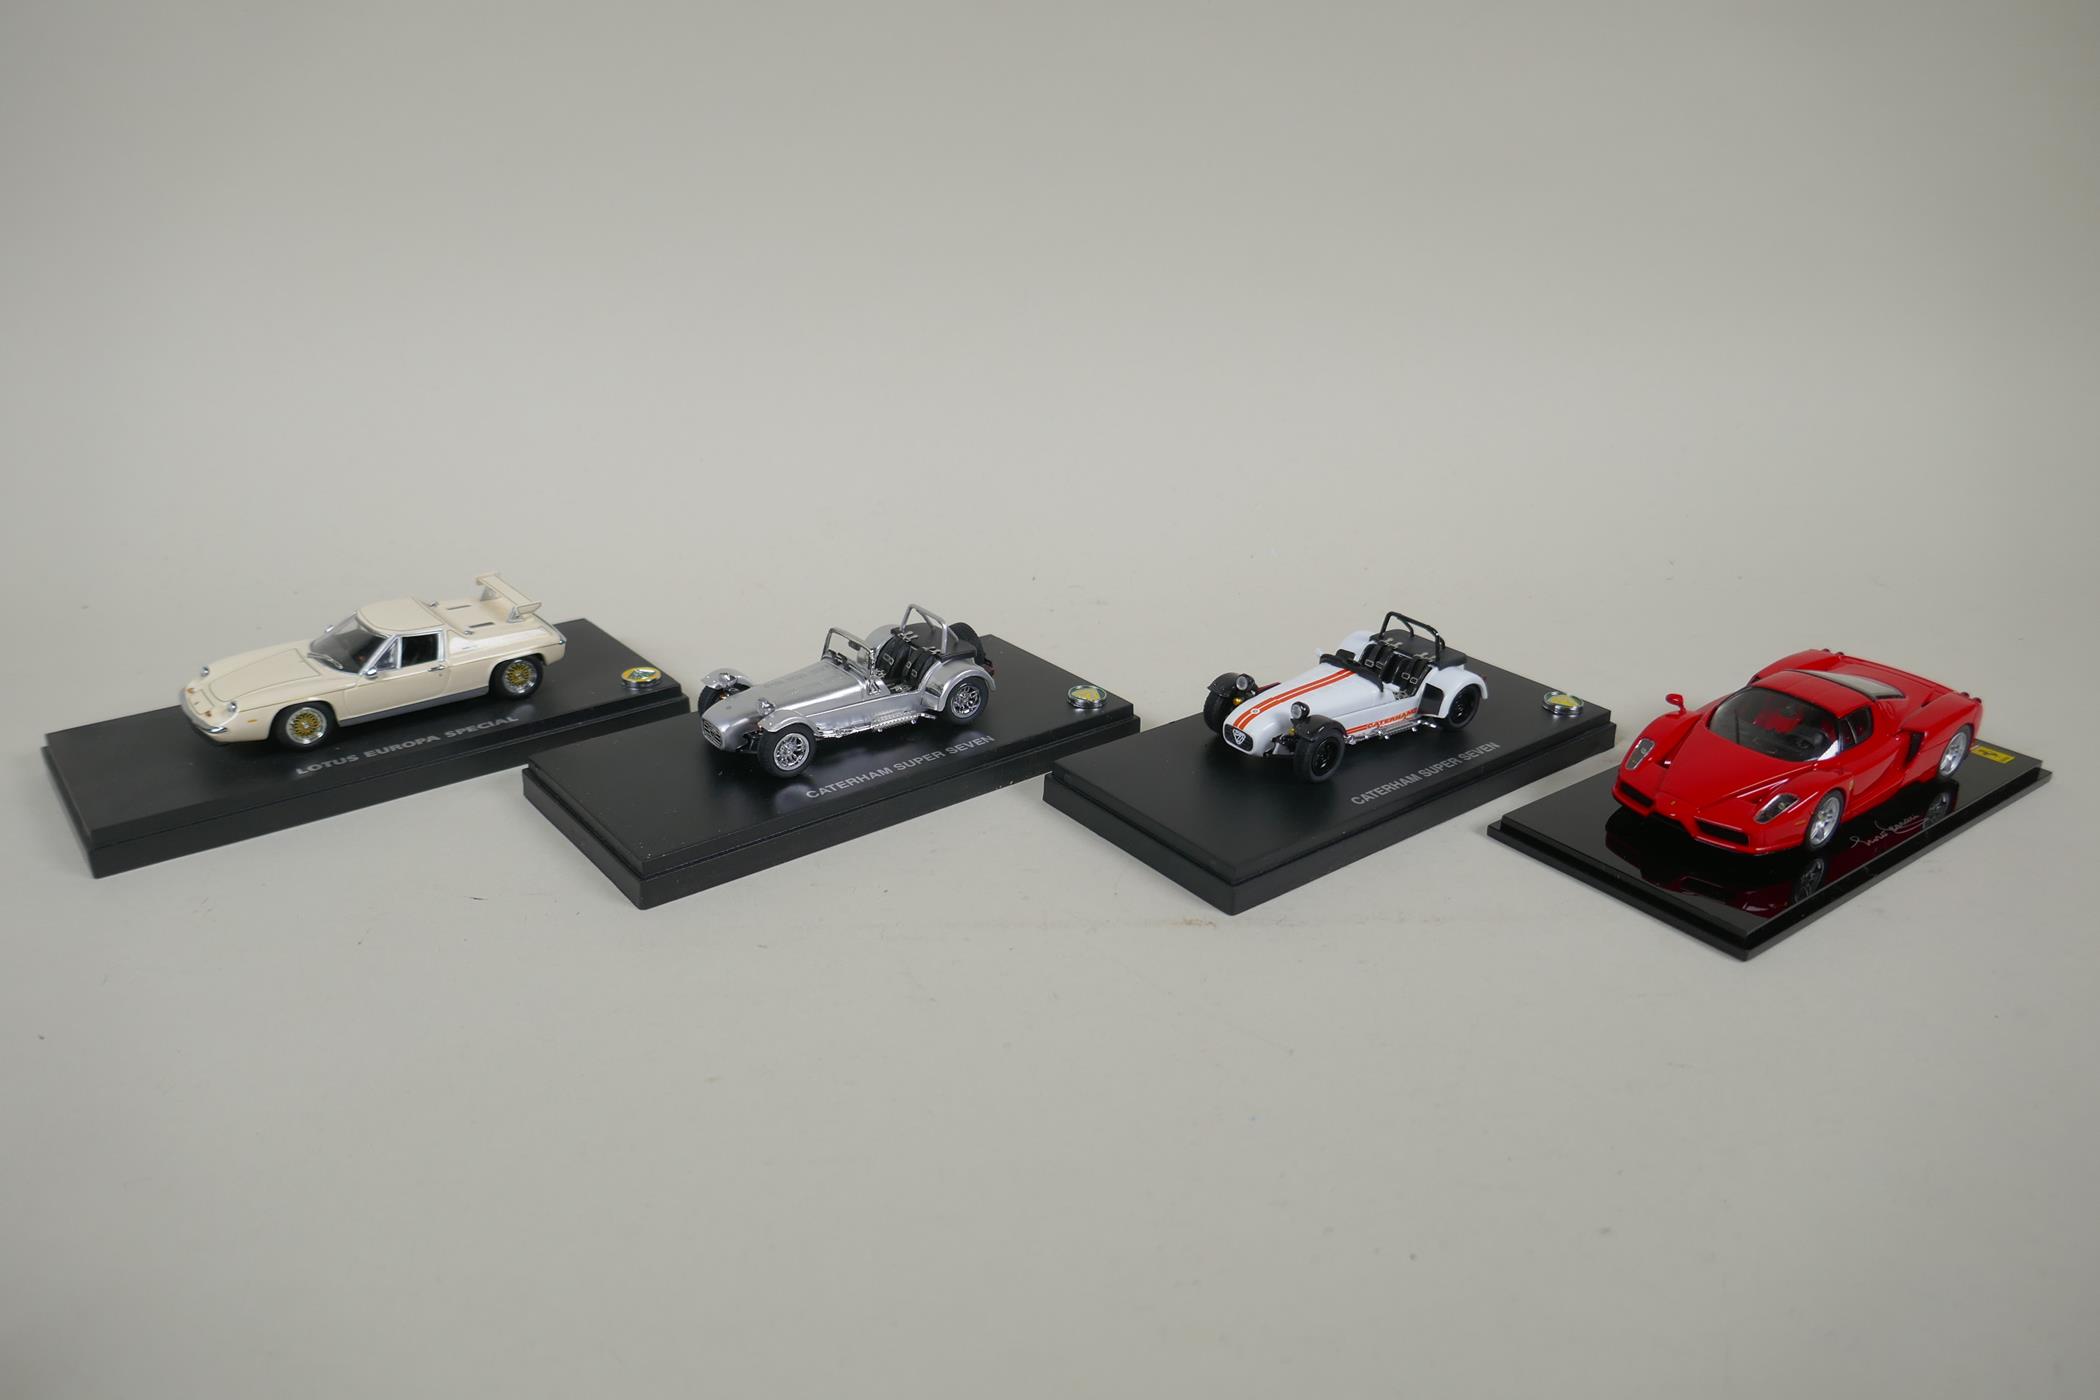 Twenty four 1:43 scale die cast model cars by various manufacturers including Auto Art, Spark, - Image 7 of 9